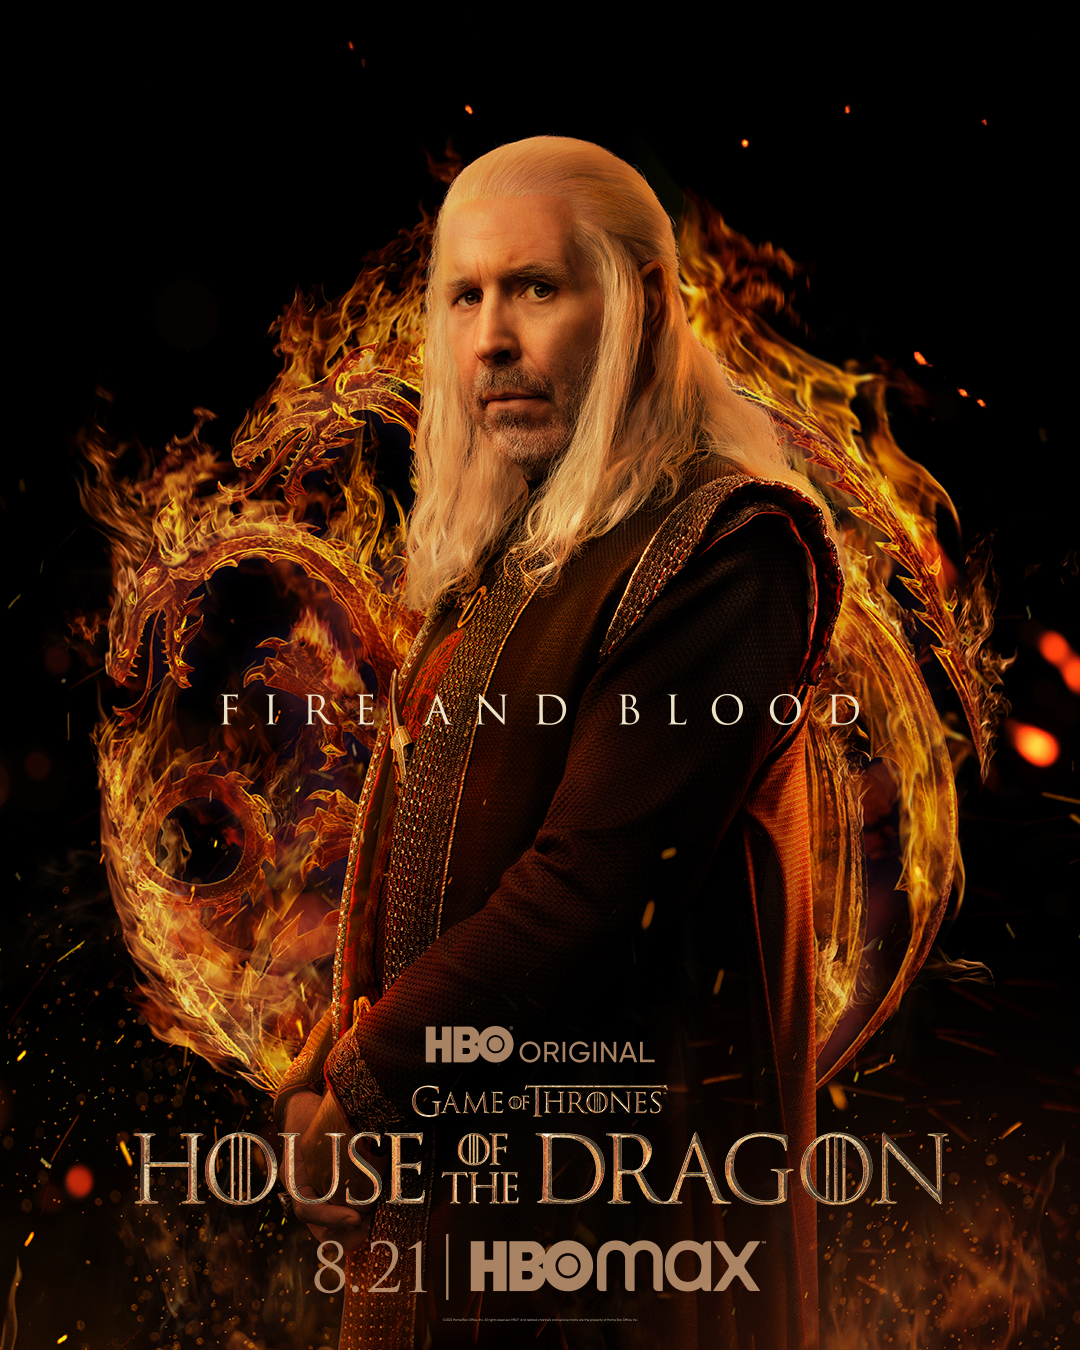 House of the Dragon Episode 1 Review! — CINEMONDO PODCAST